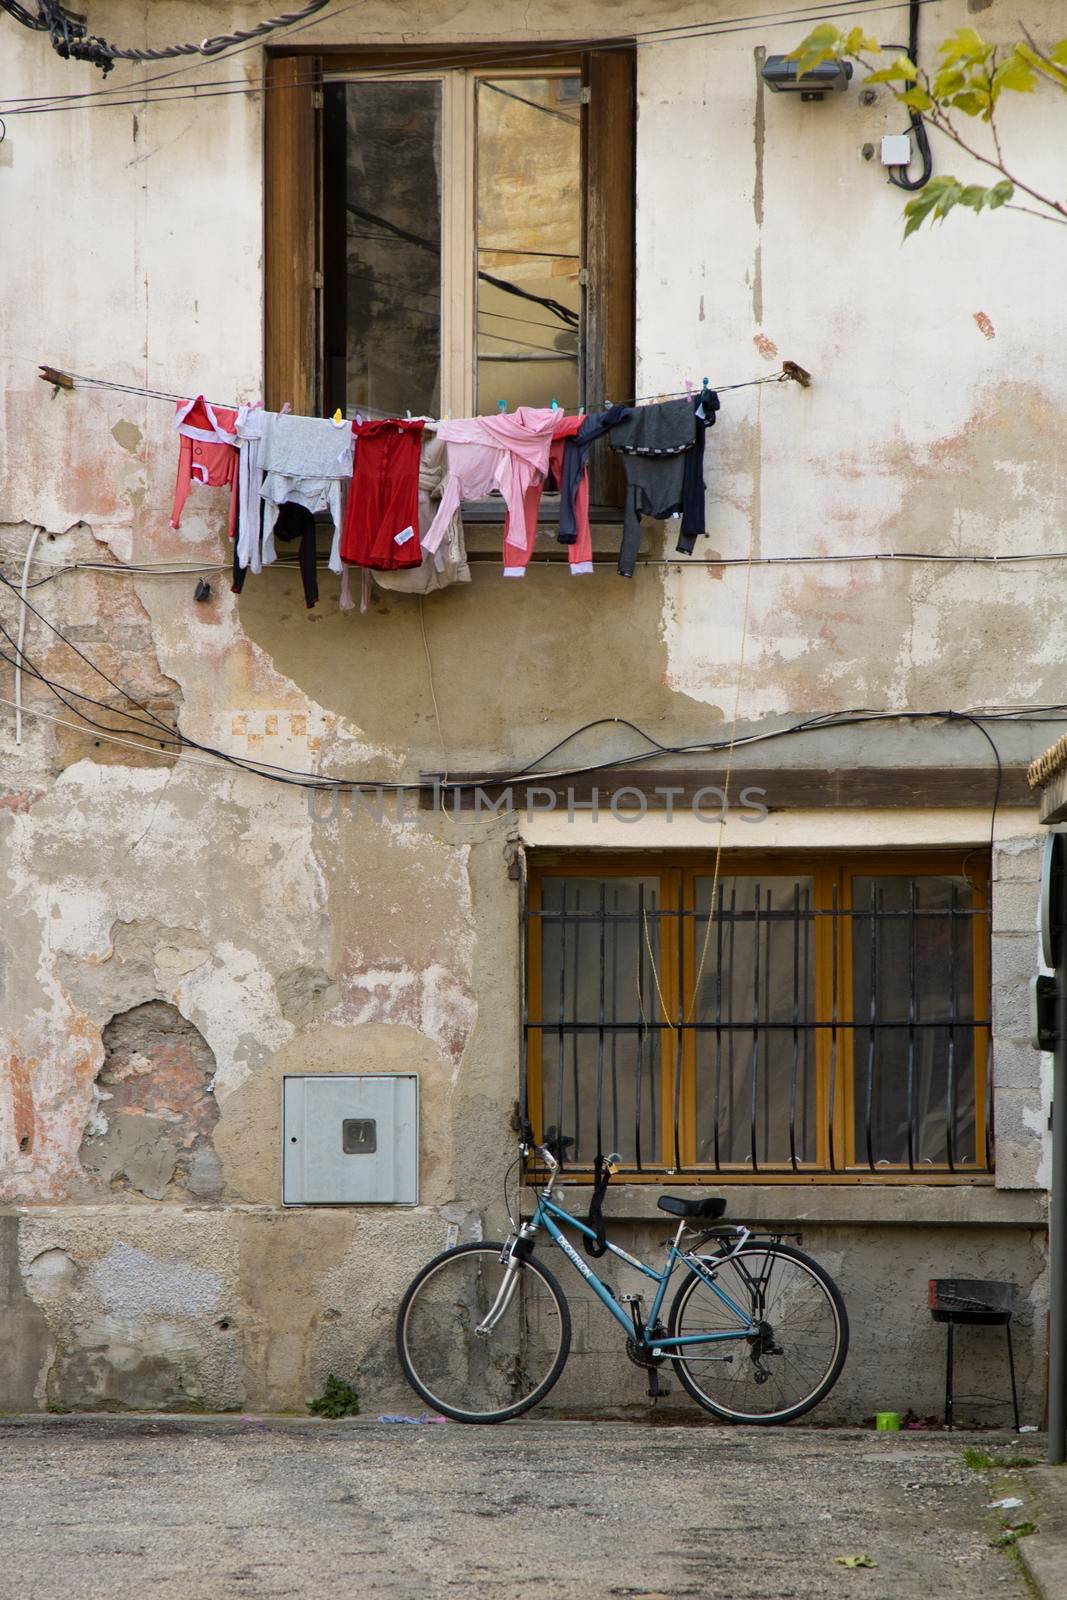 Street picture showing a facade with a window and some clothes hanging over a bicycle